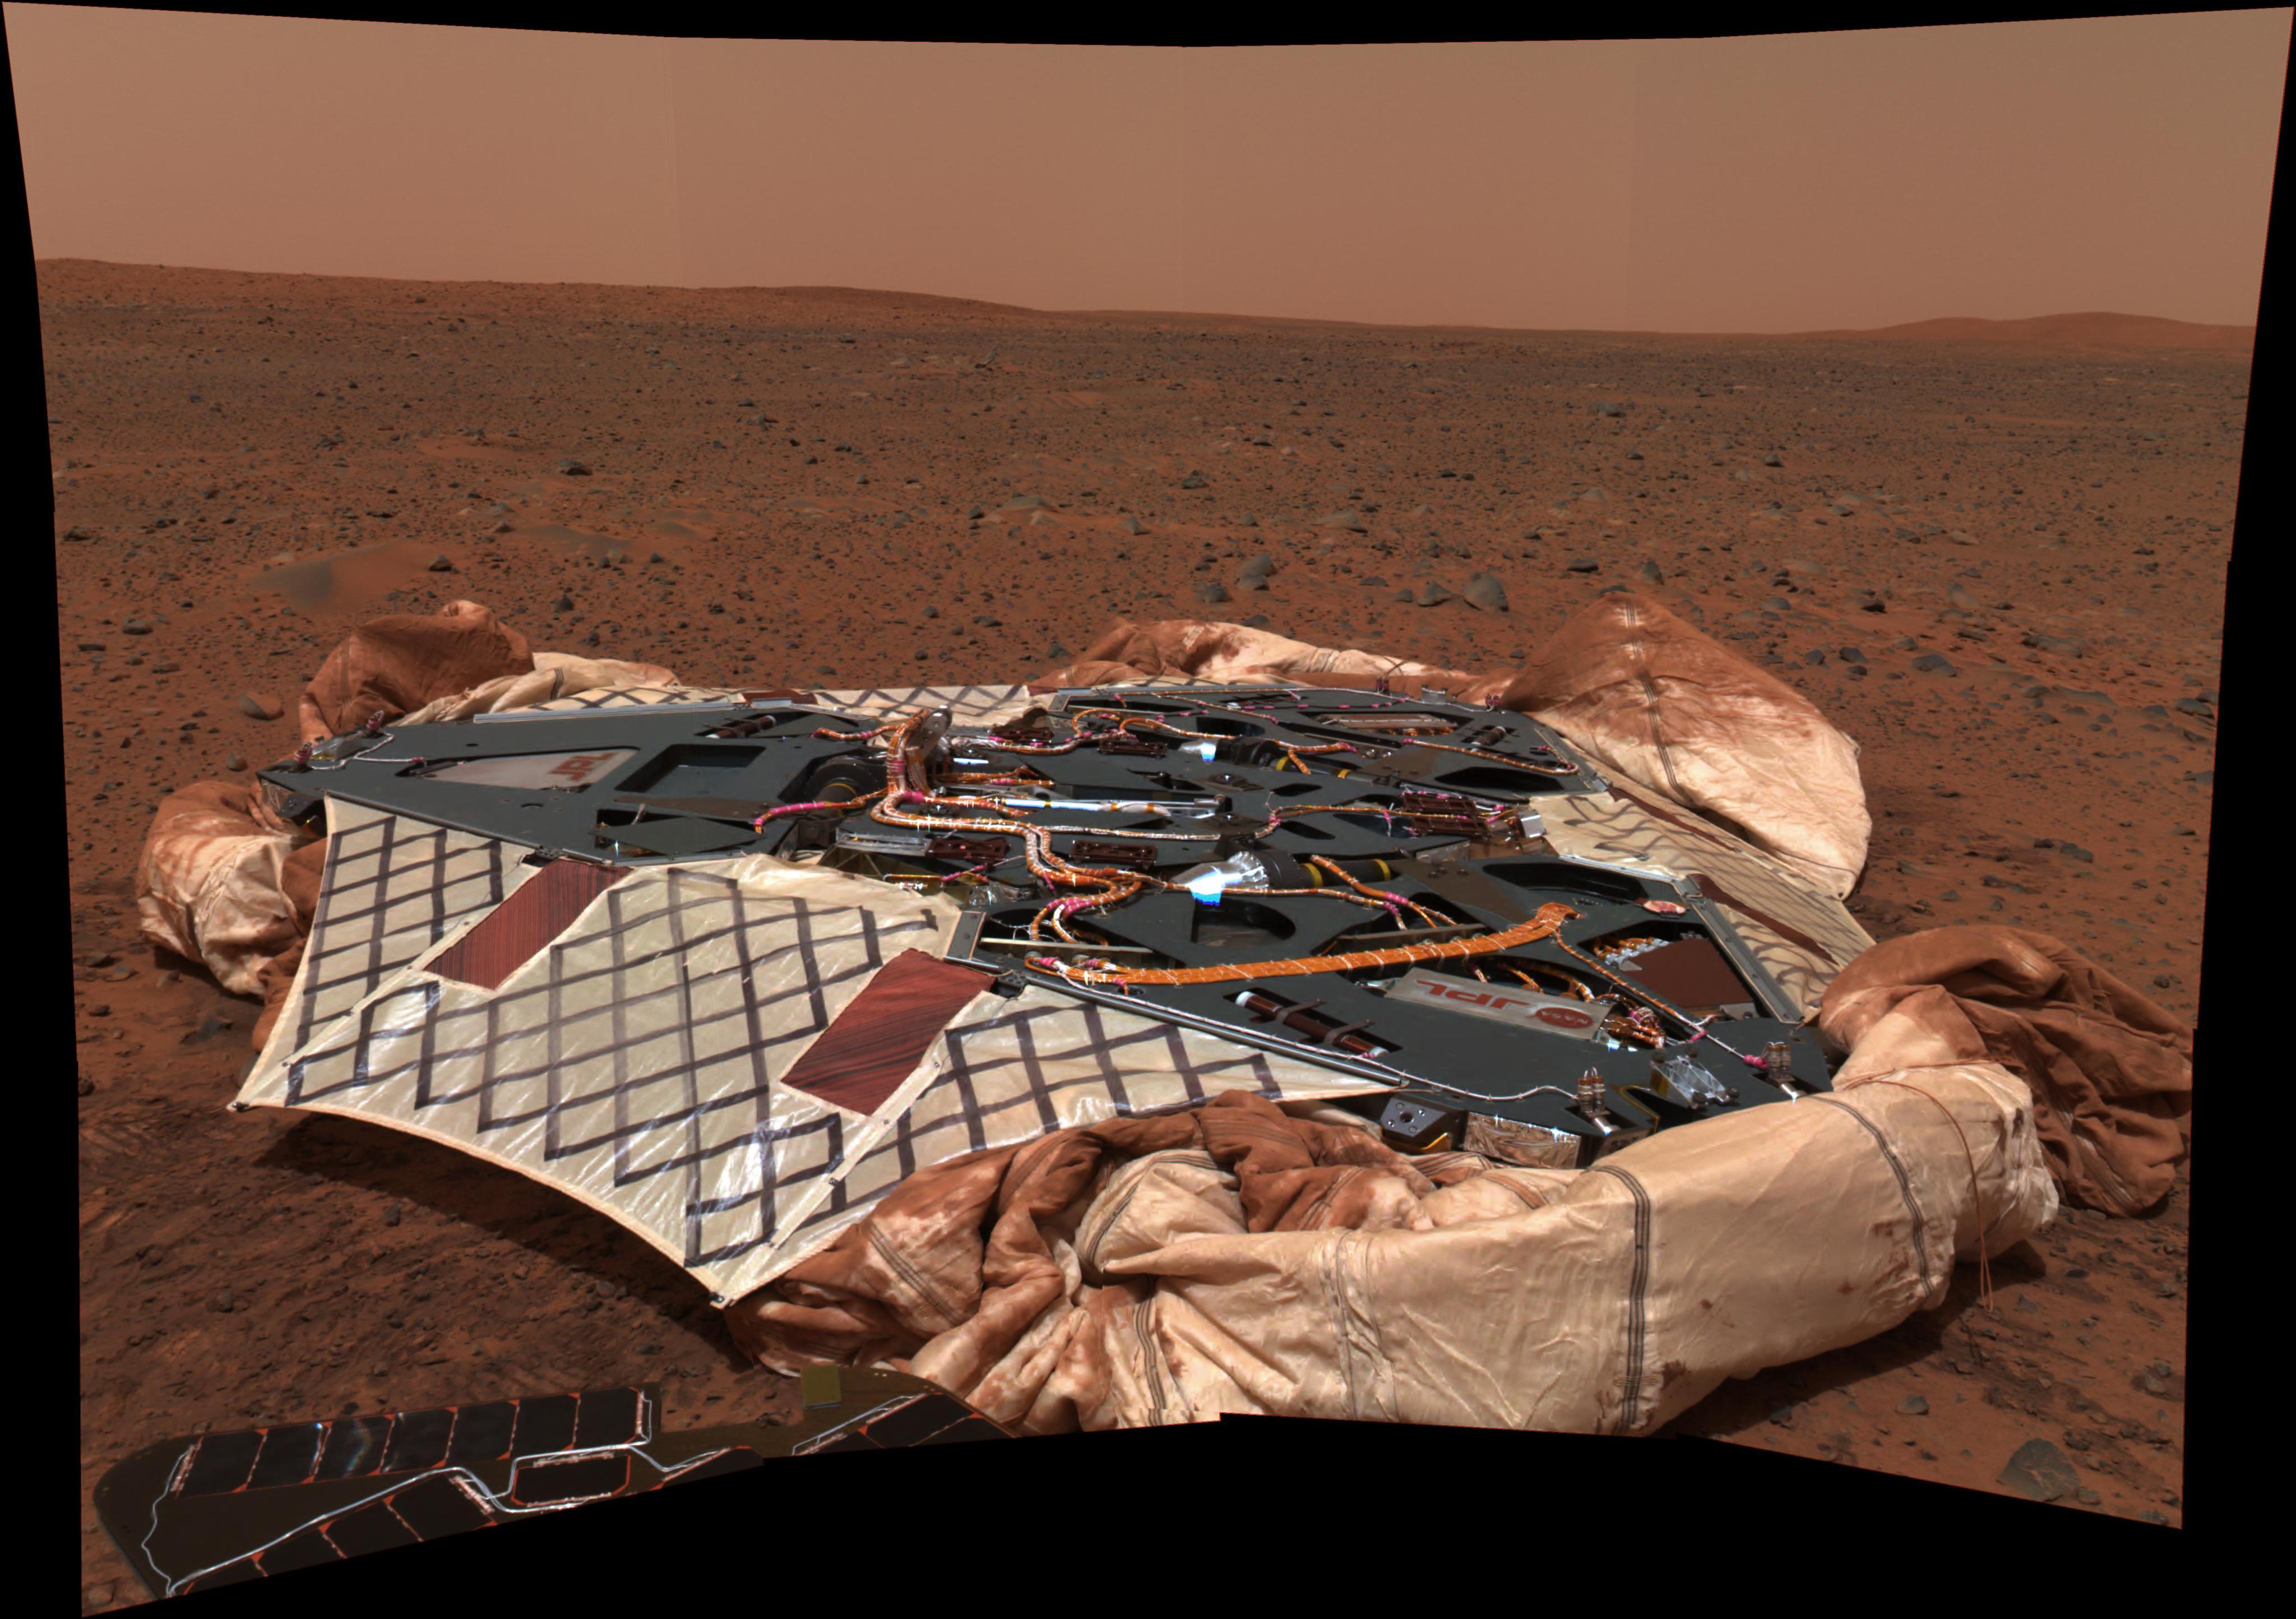 Spirit's landing platform is surrounded by crumpled airbags in this photo of the landing site.